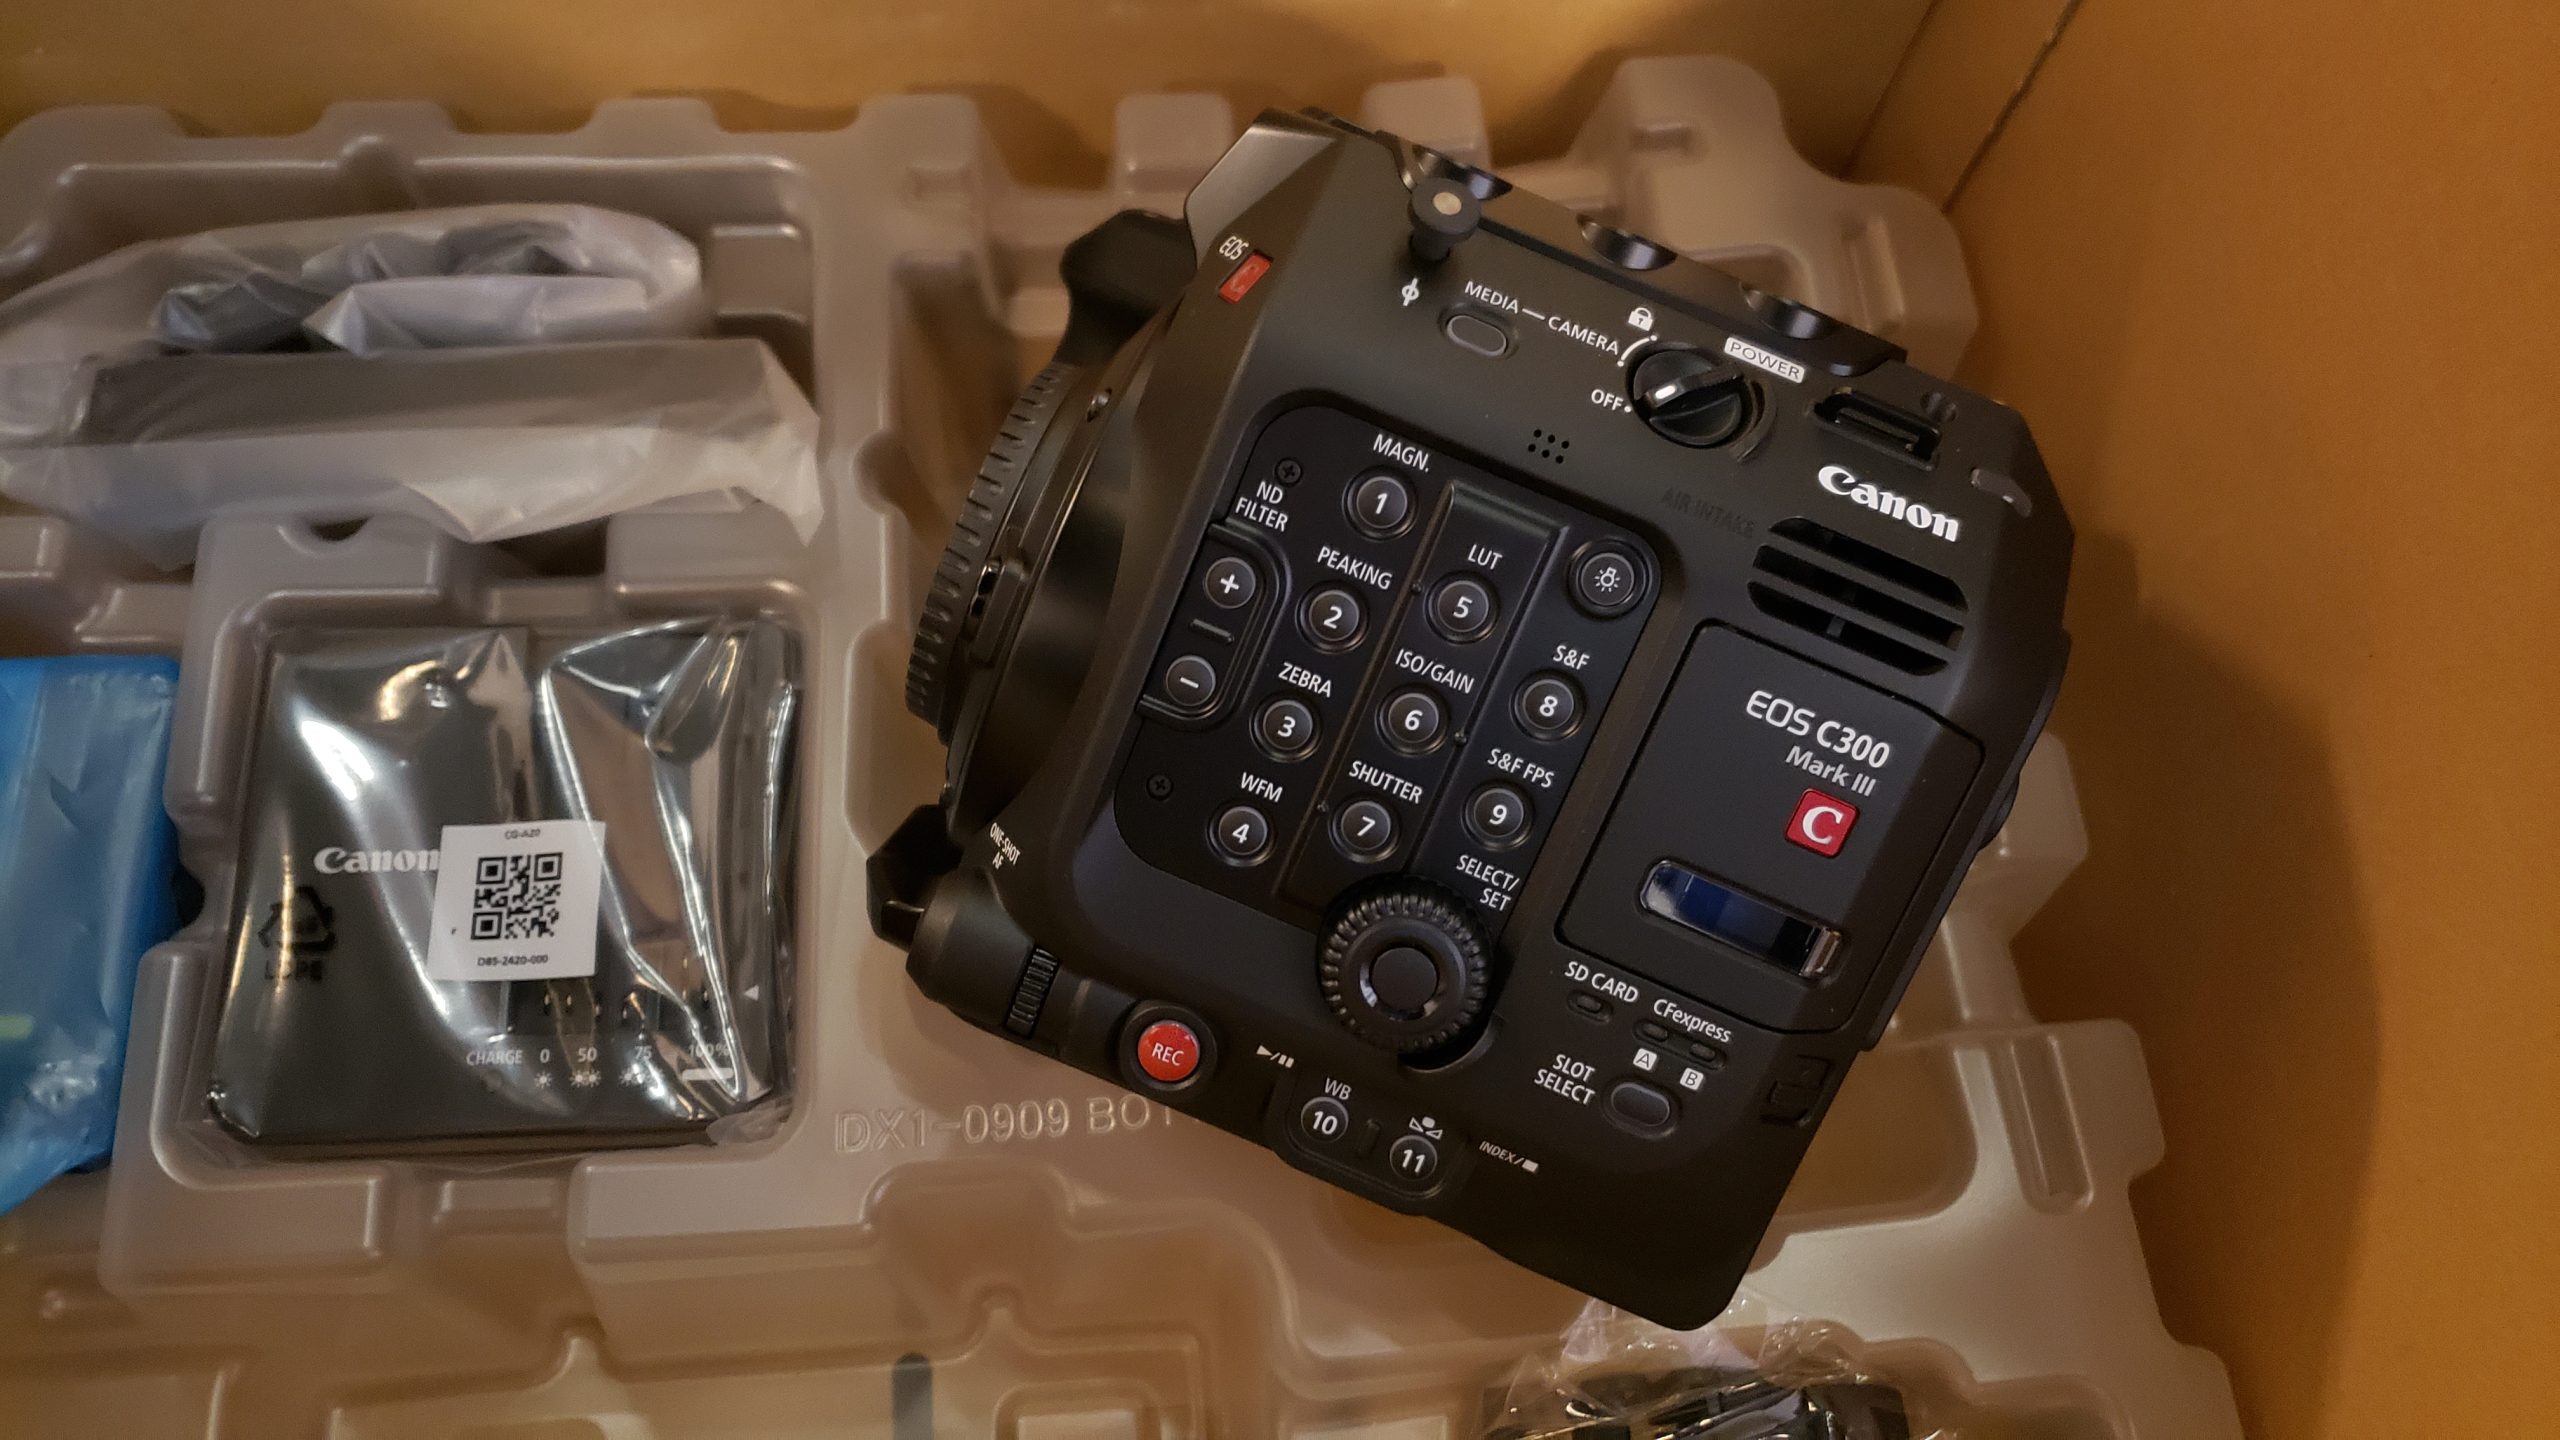 Receiving a brand new Canon C300 MKIII camera